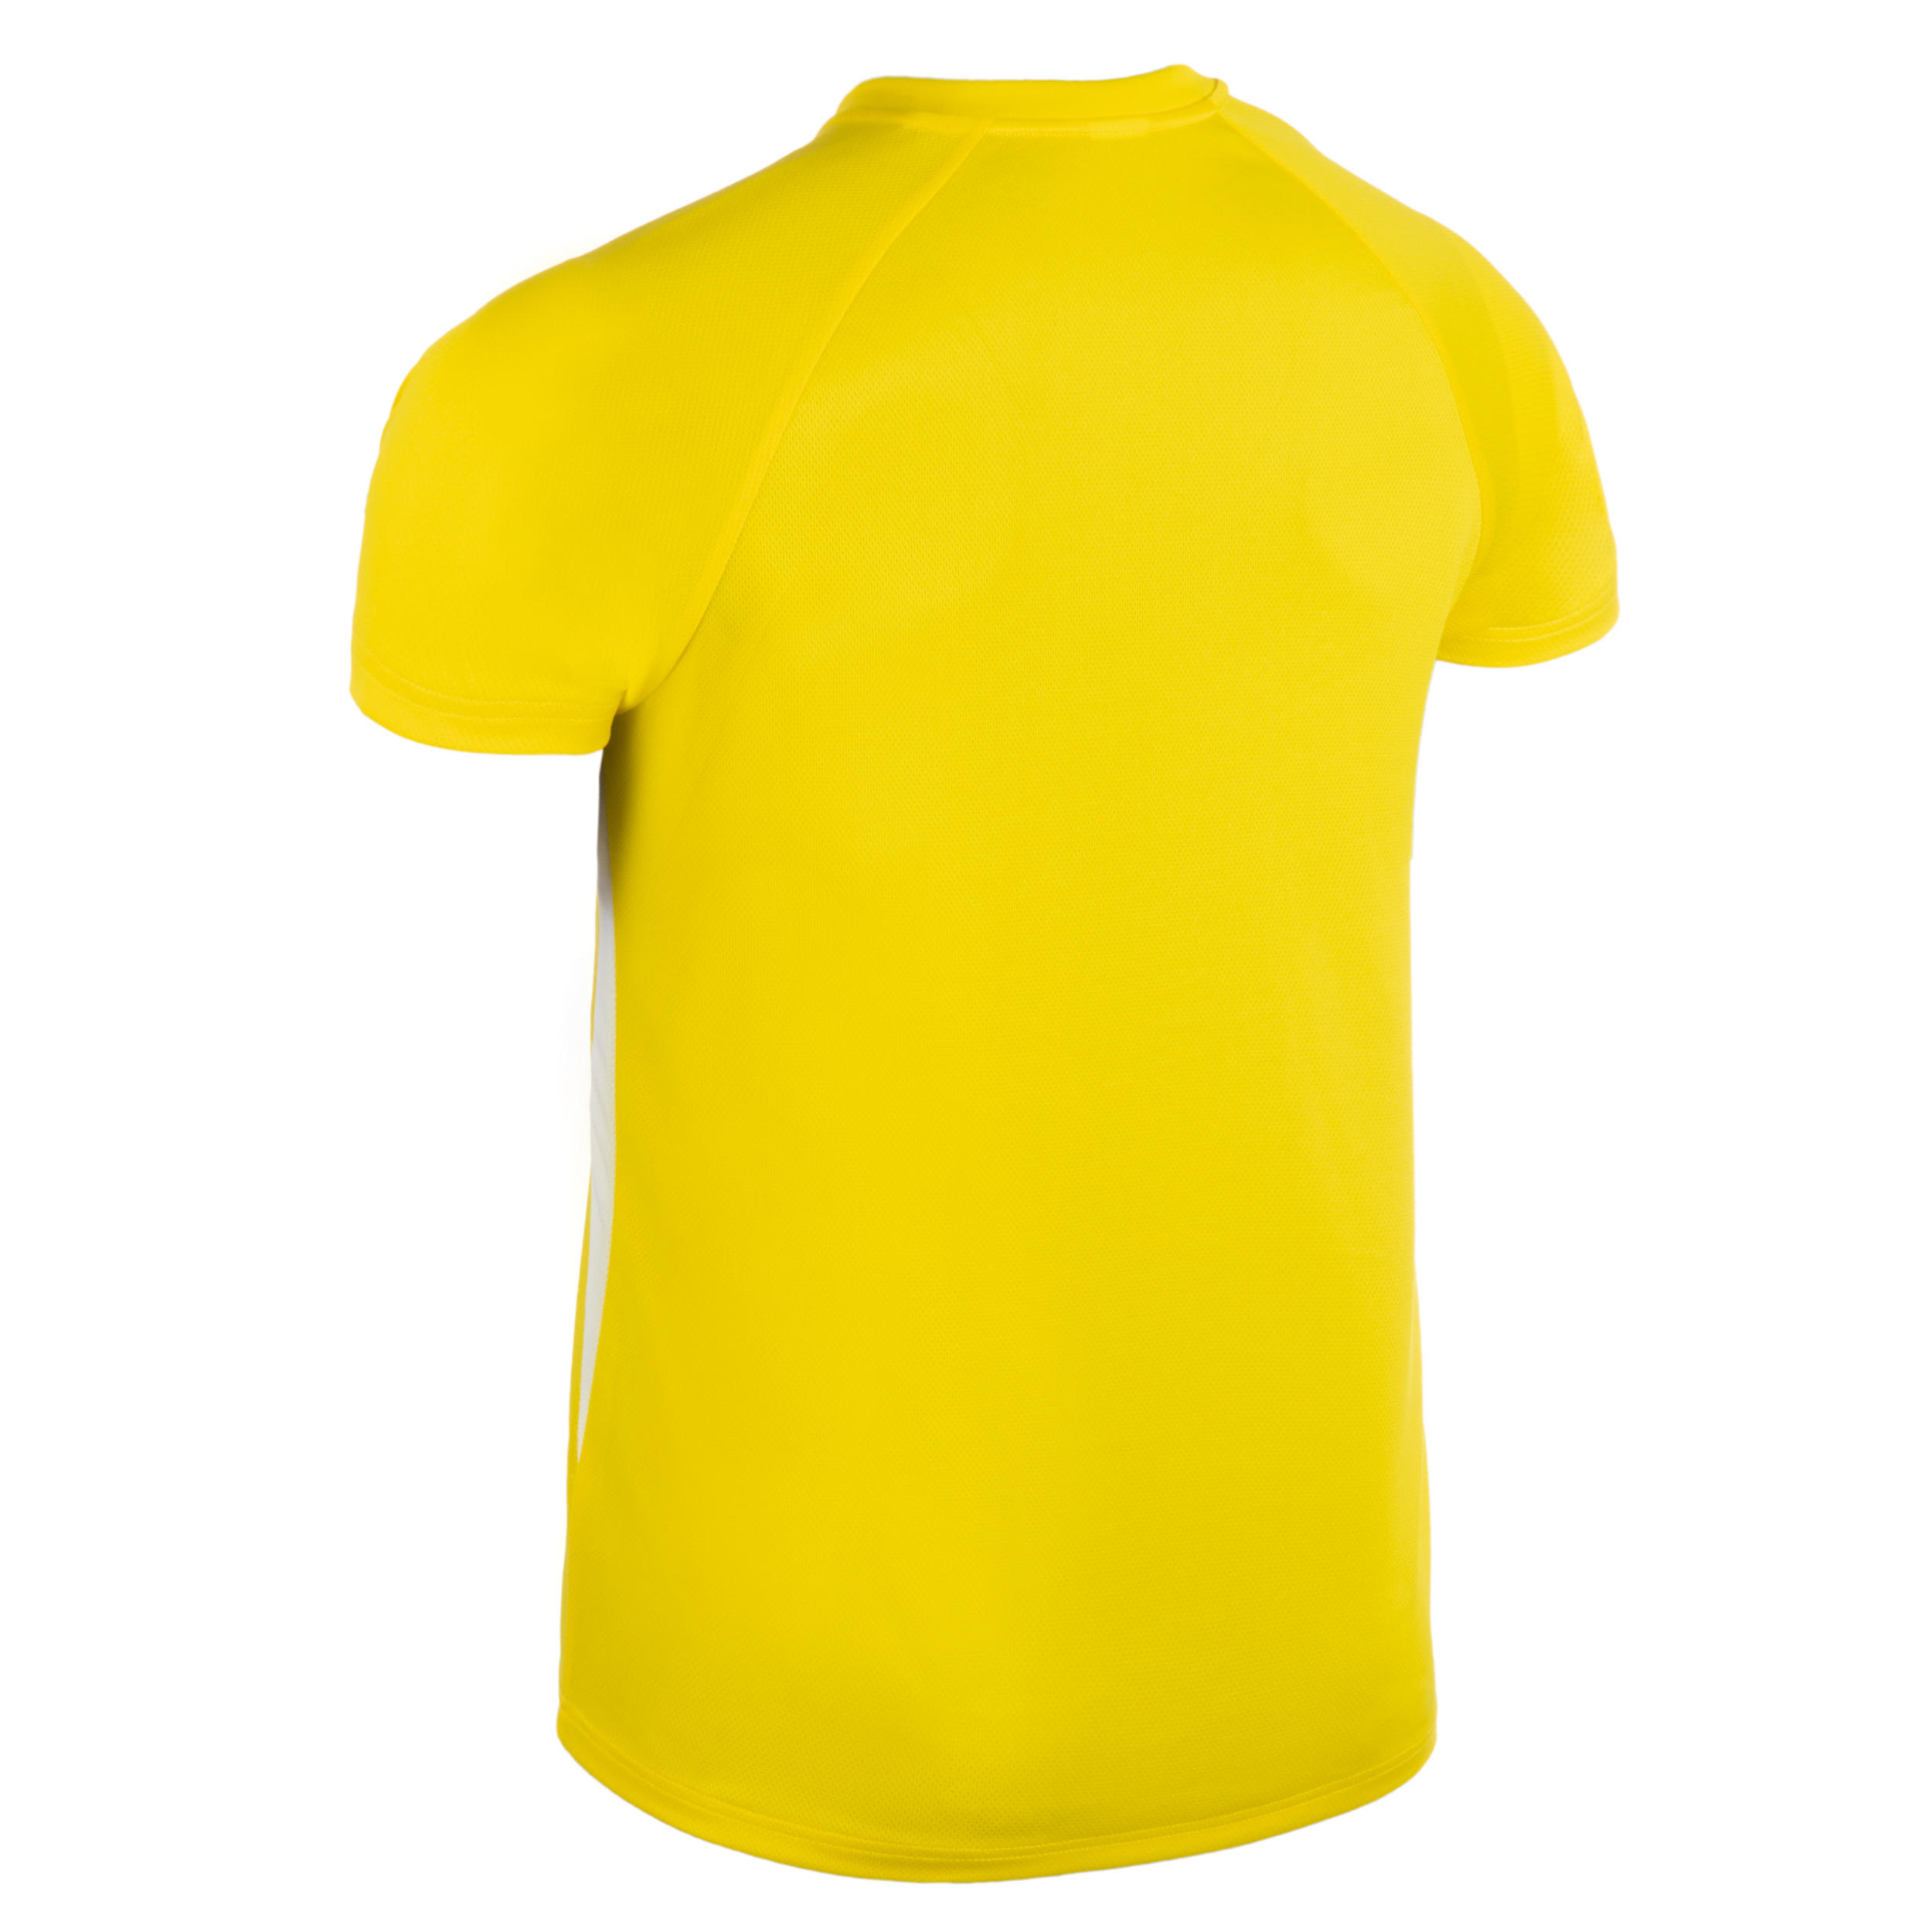 V100 Volleyball Jersey - Yellow 2/8